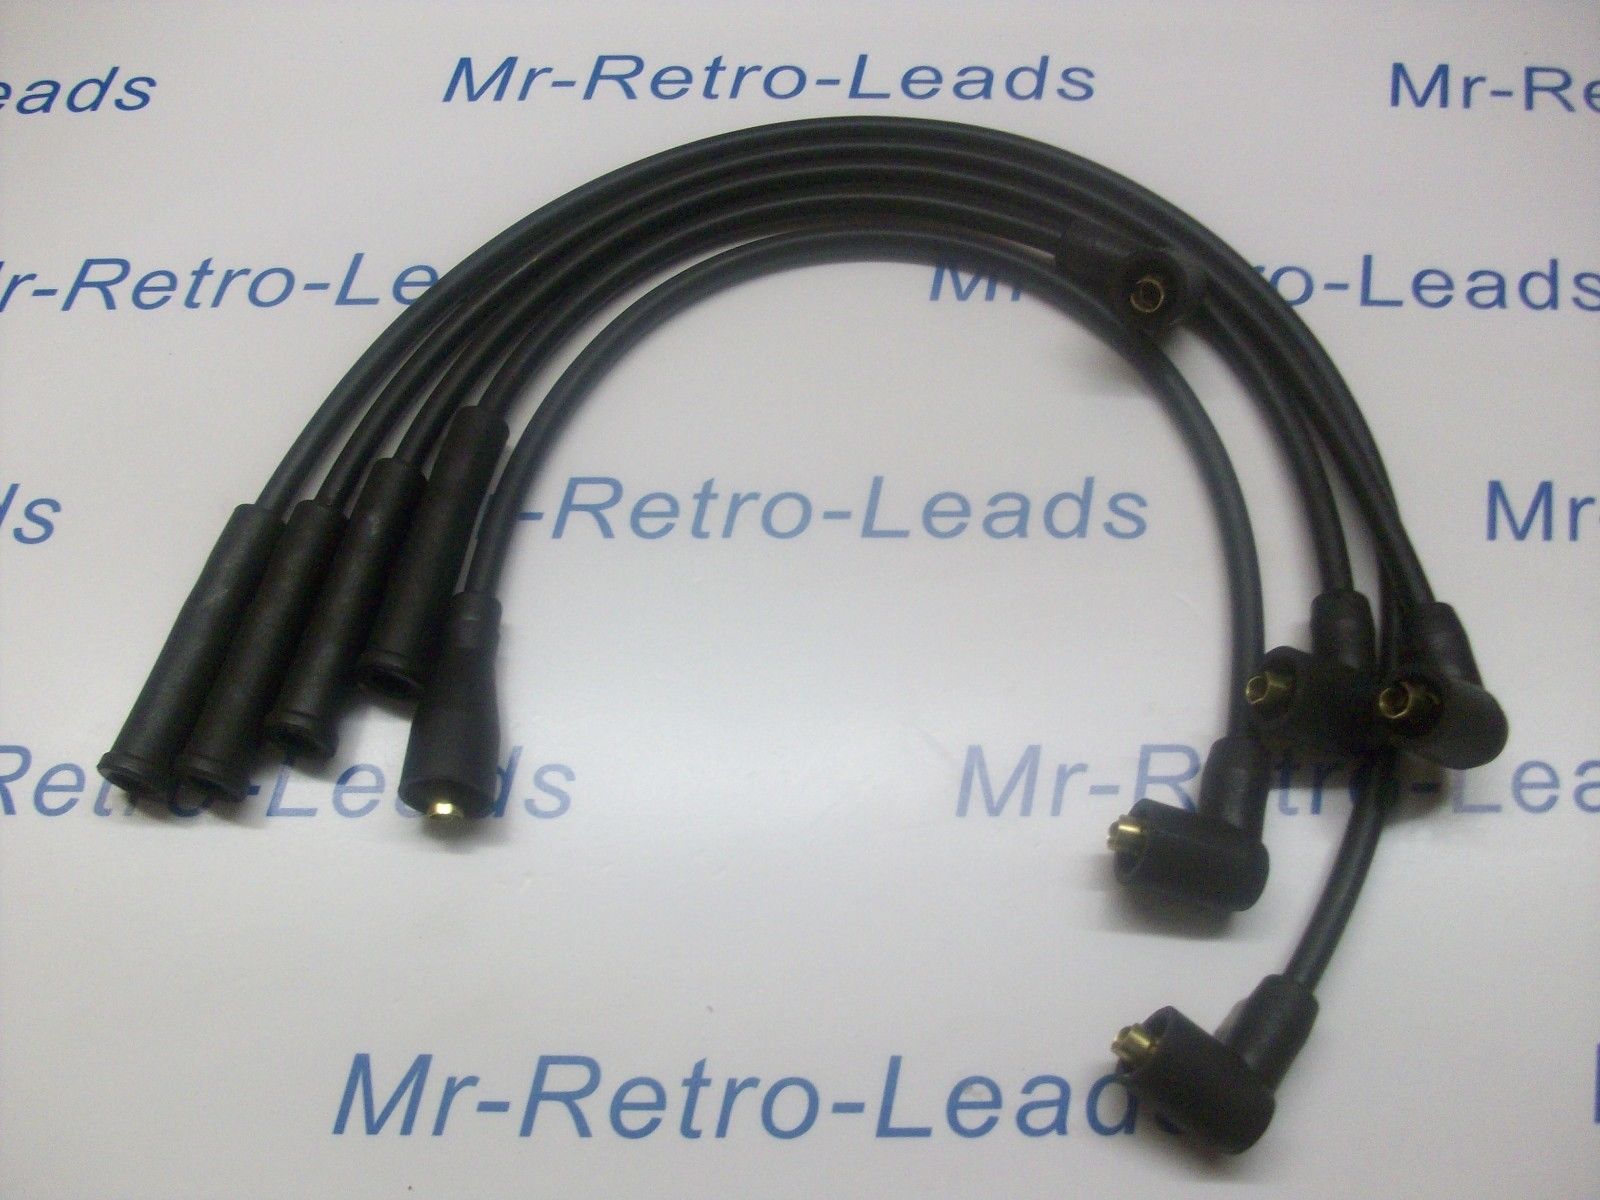 Black 8mm Performance Ignition Leads For Opel Manta Ht Quality Hand Built Leads